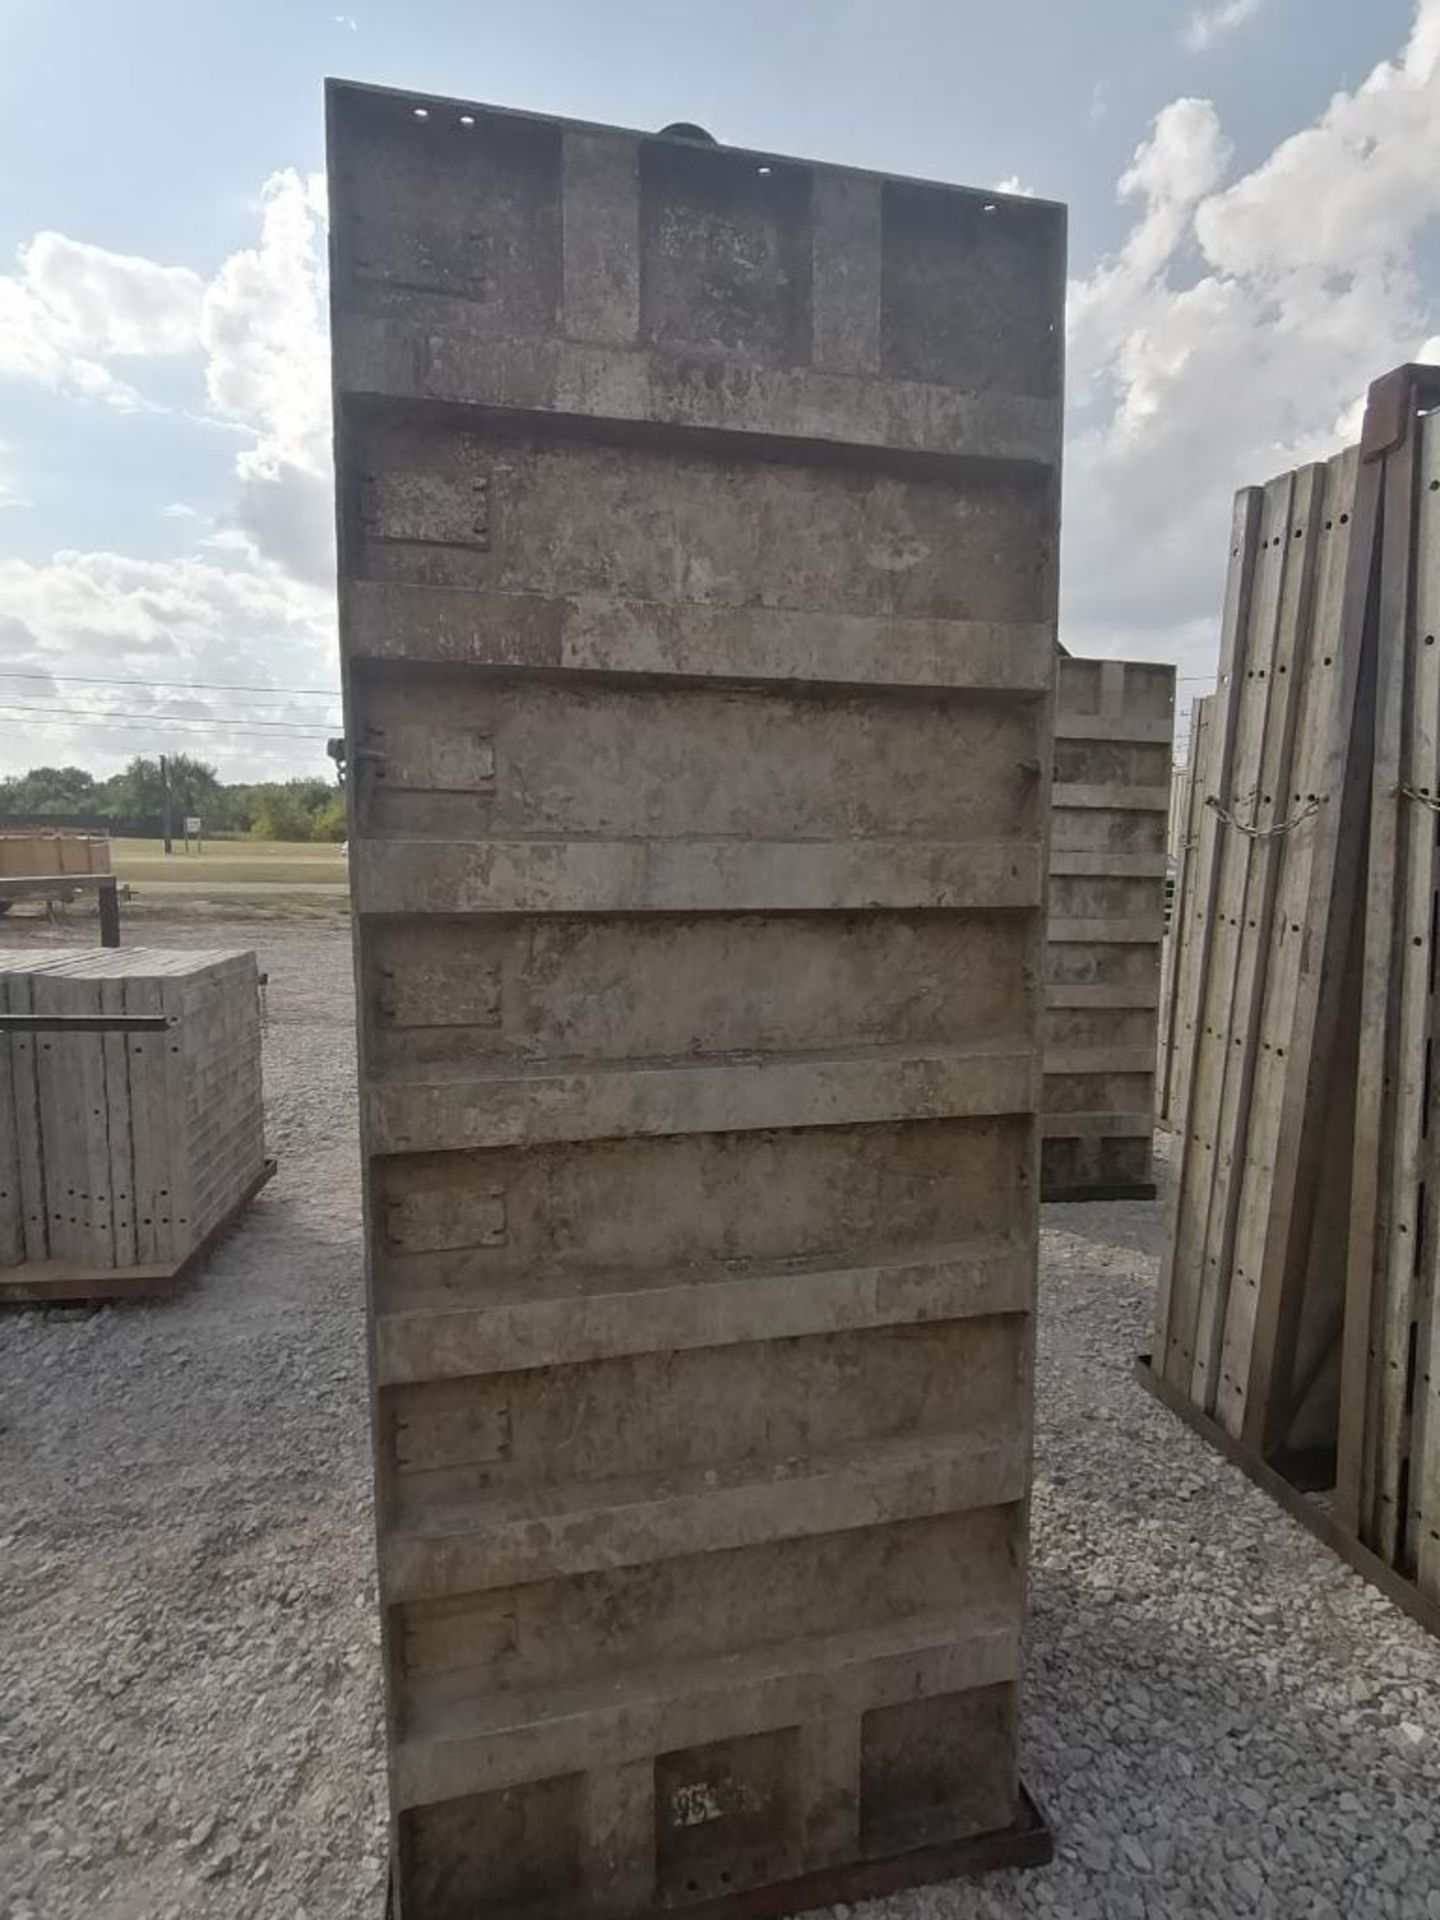 (16) 3' x 8' TUF-N-LITE Smooth Aluminum Concrete Forms 6-12 Hole Pattern, Basket is Included. Locate - Image 5 of 6